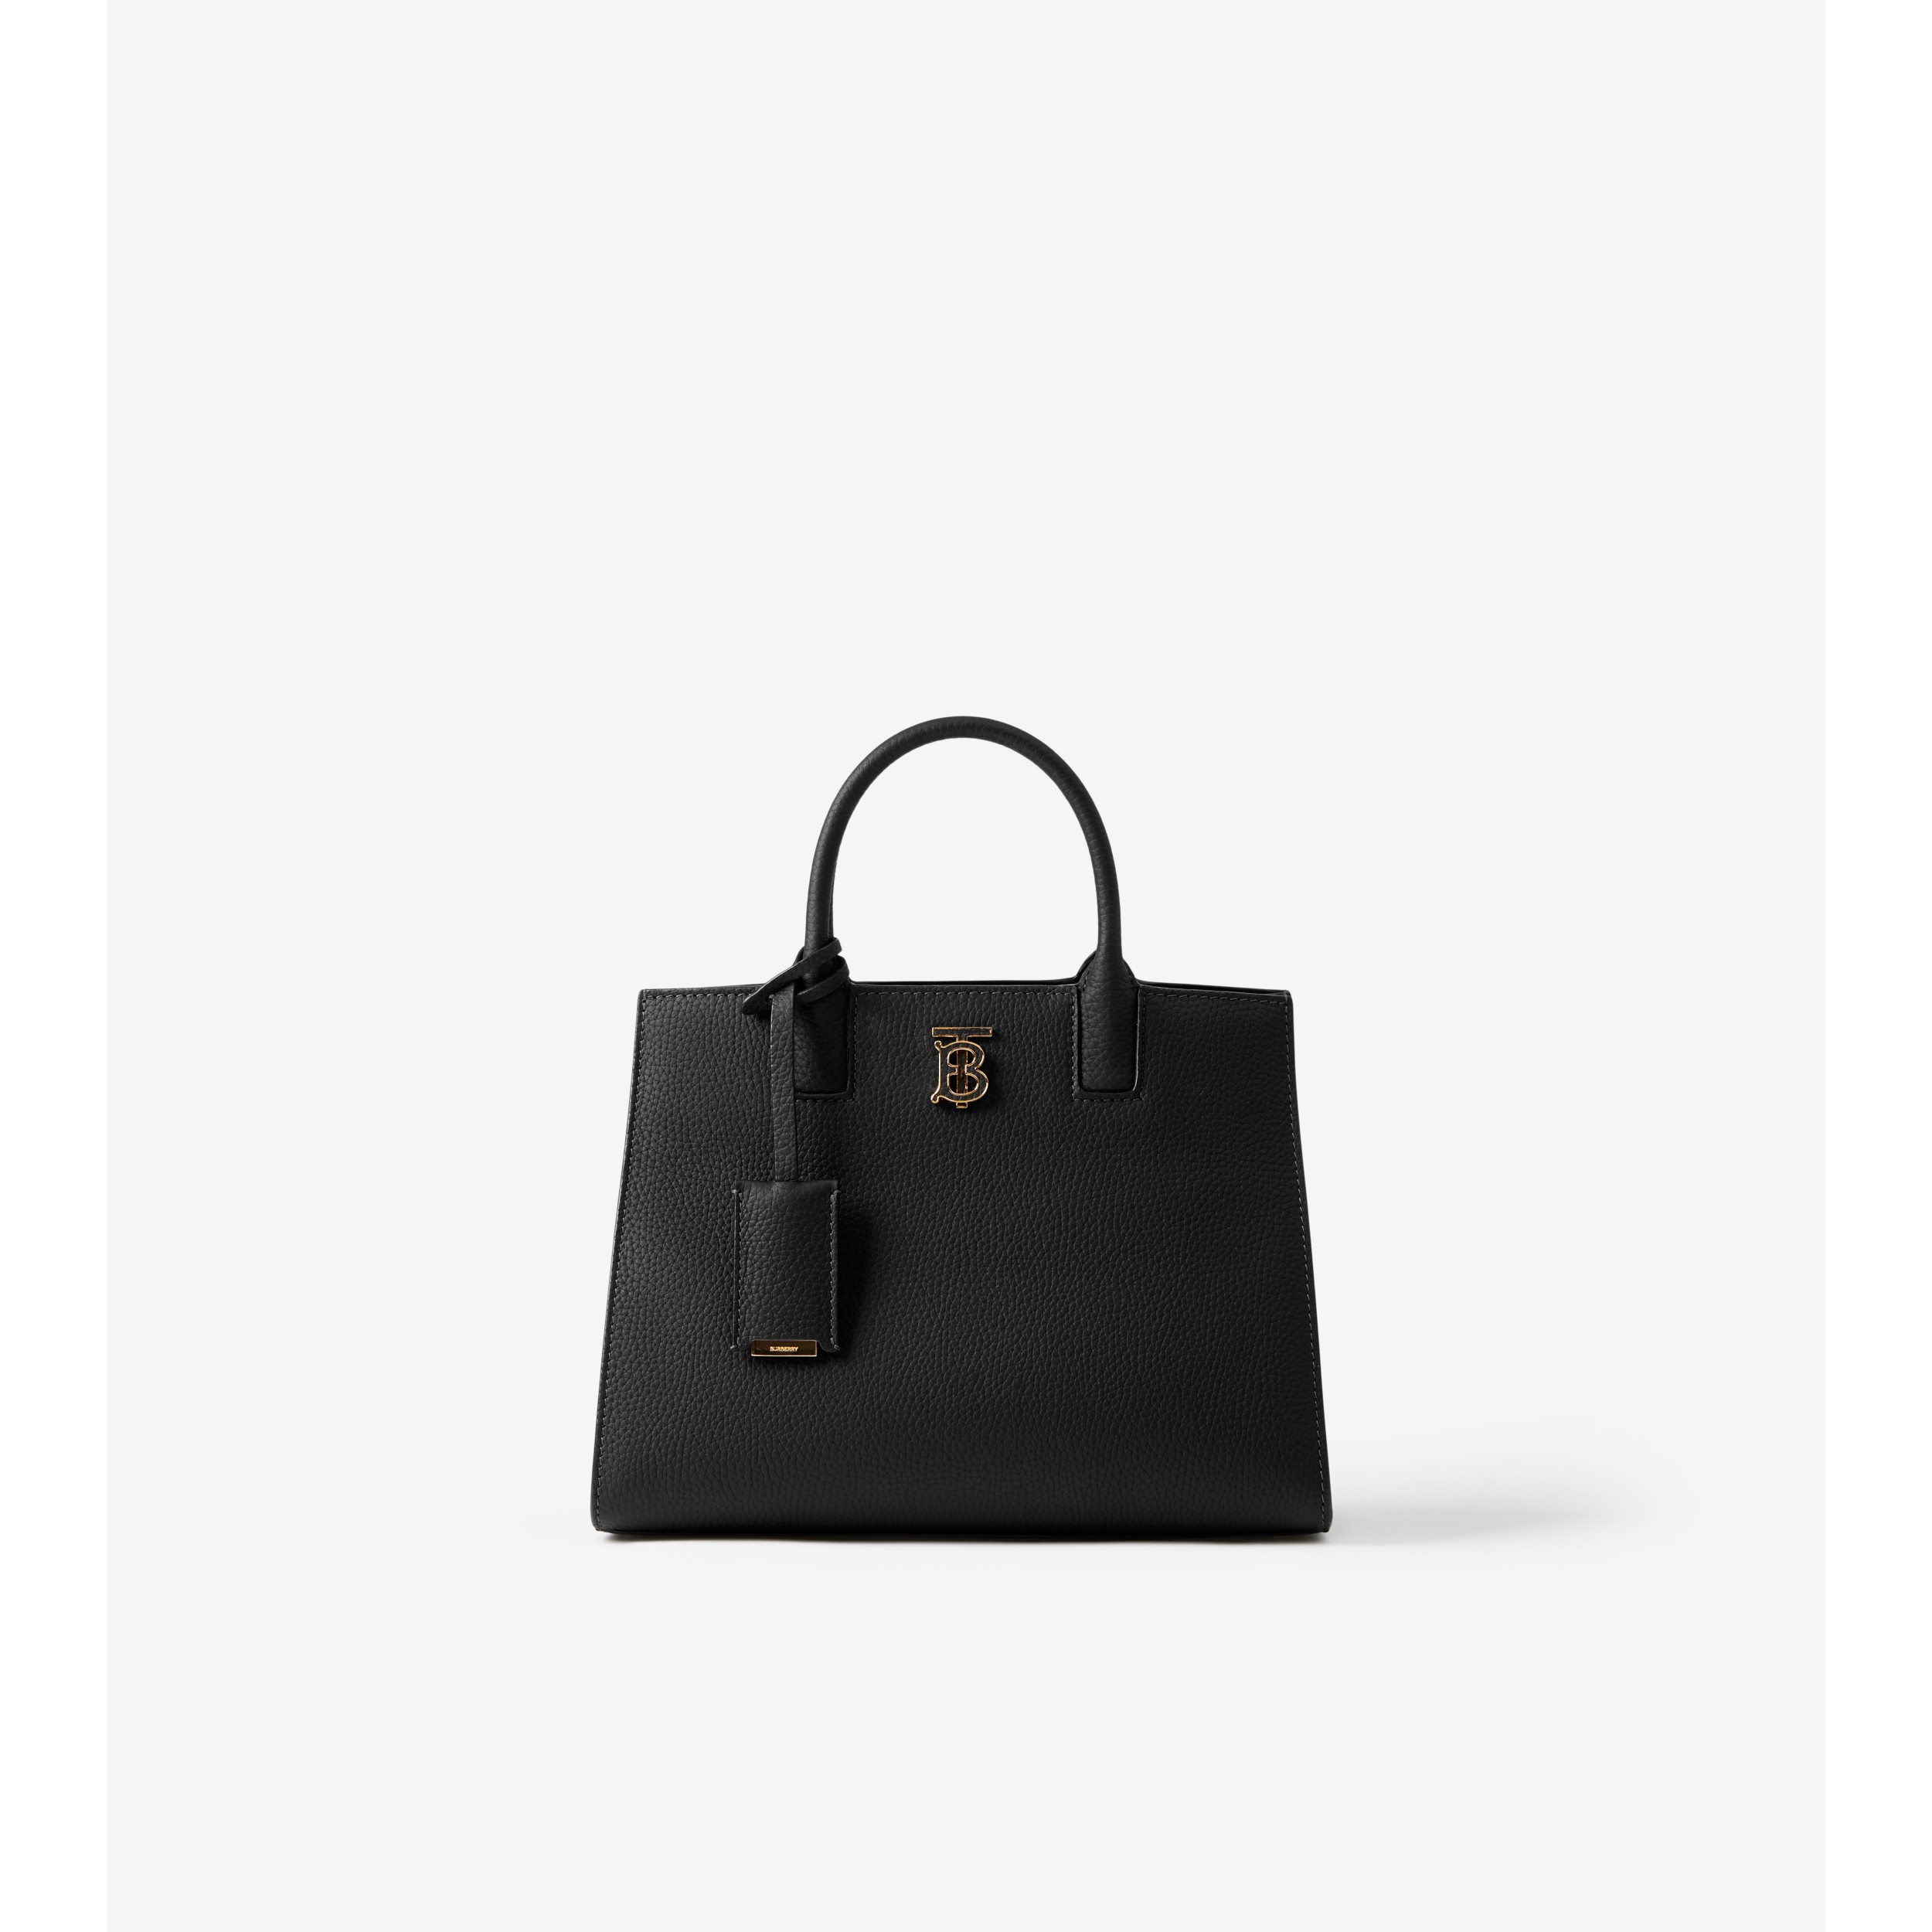 Burberry Black Leather Tote Bag Burberry